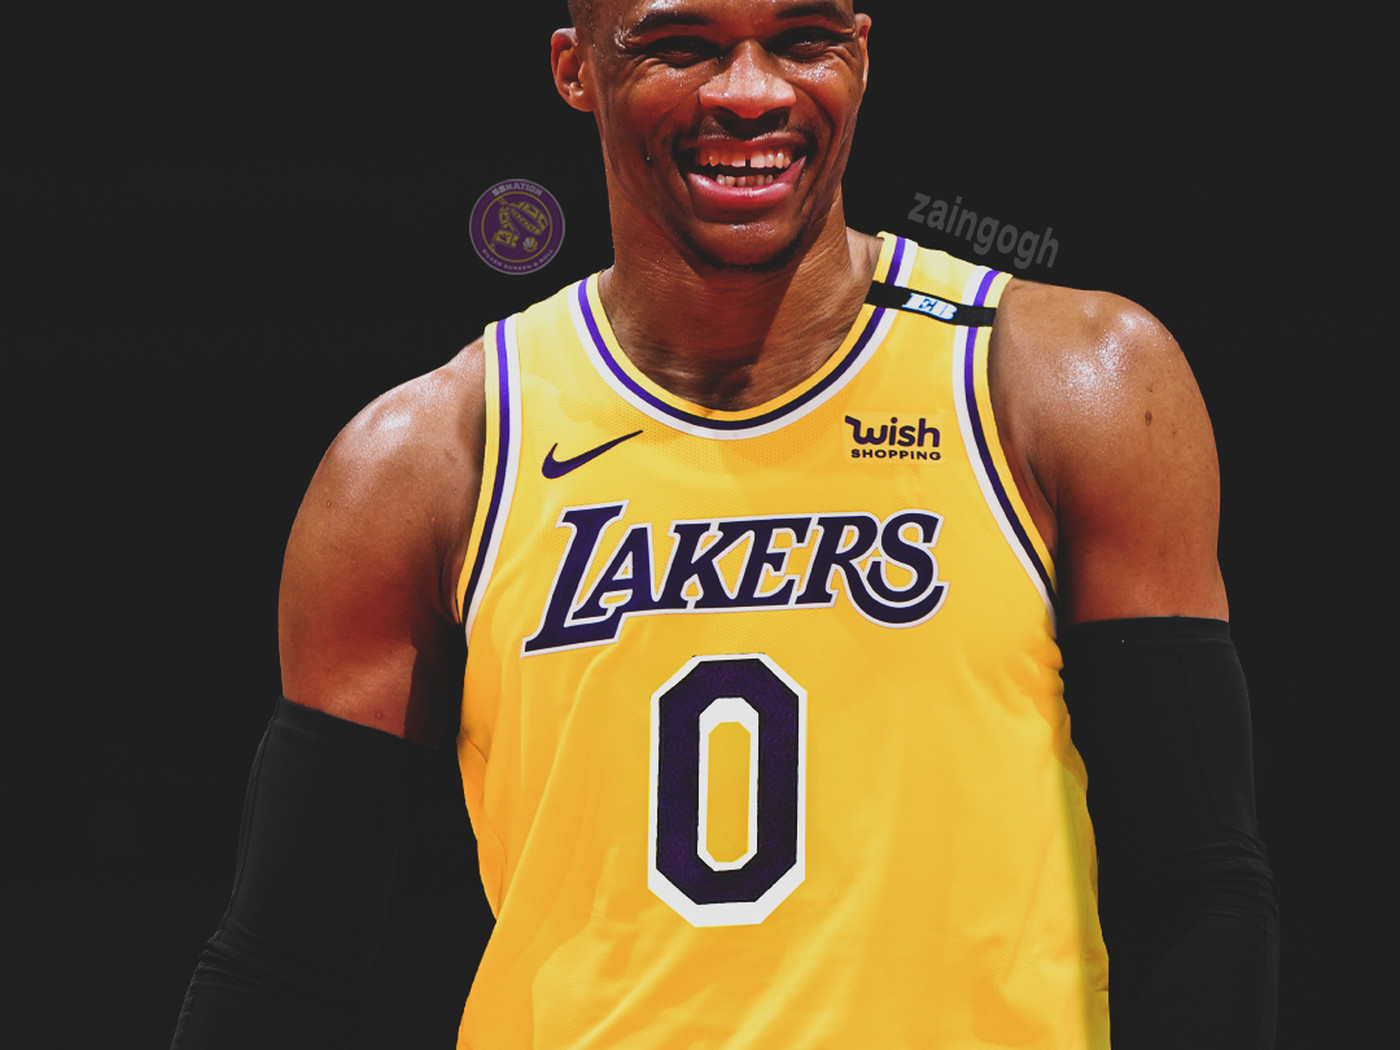 Lakers officially trade for Russell Westbrook, which may actually sense Screen and Roll